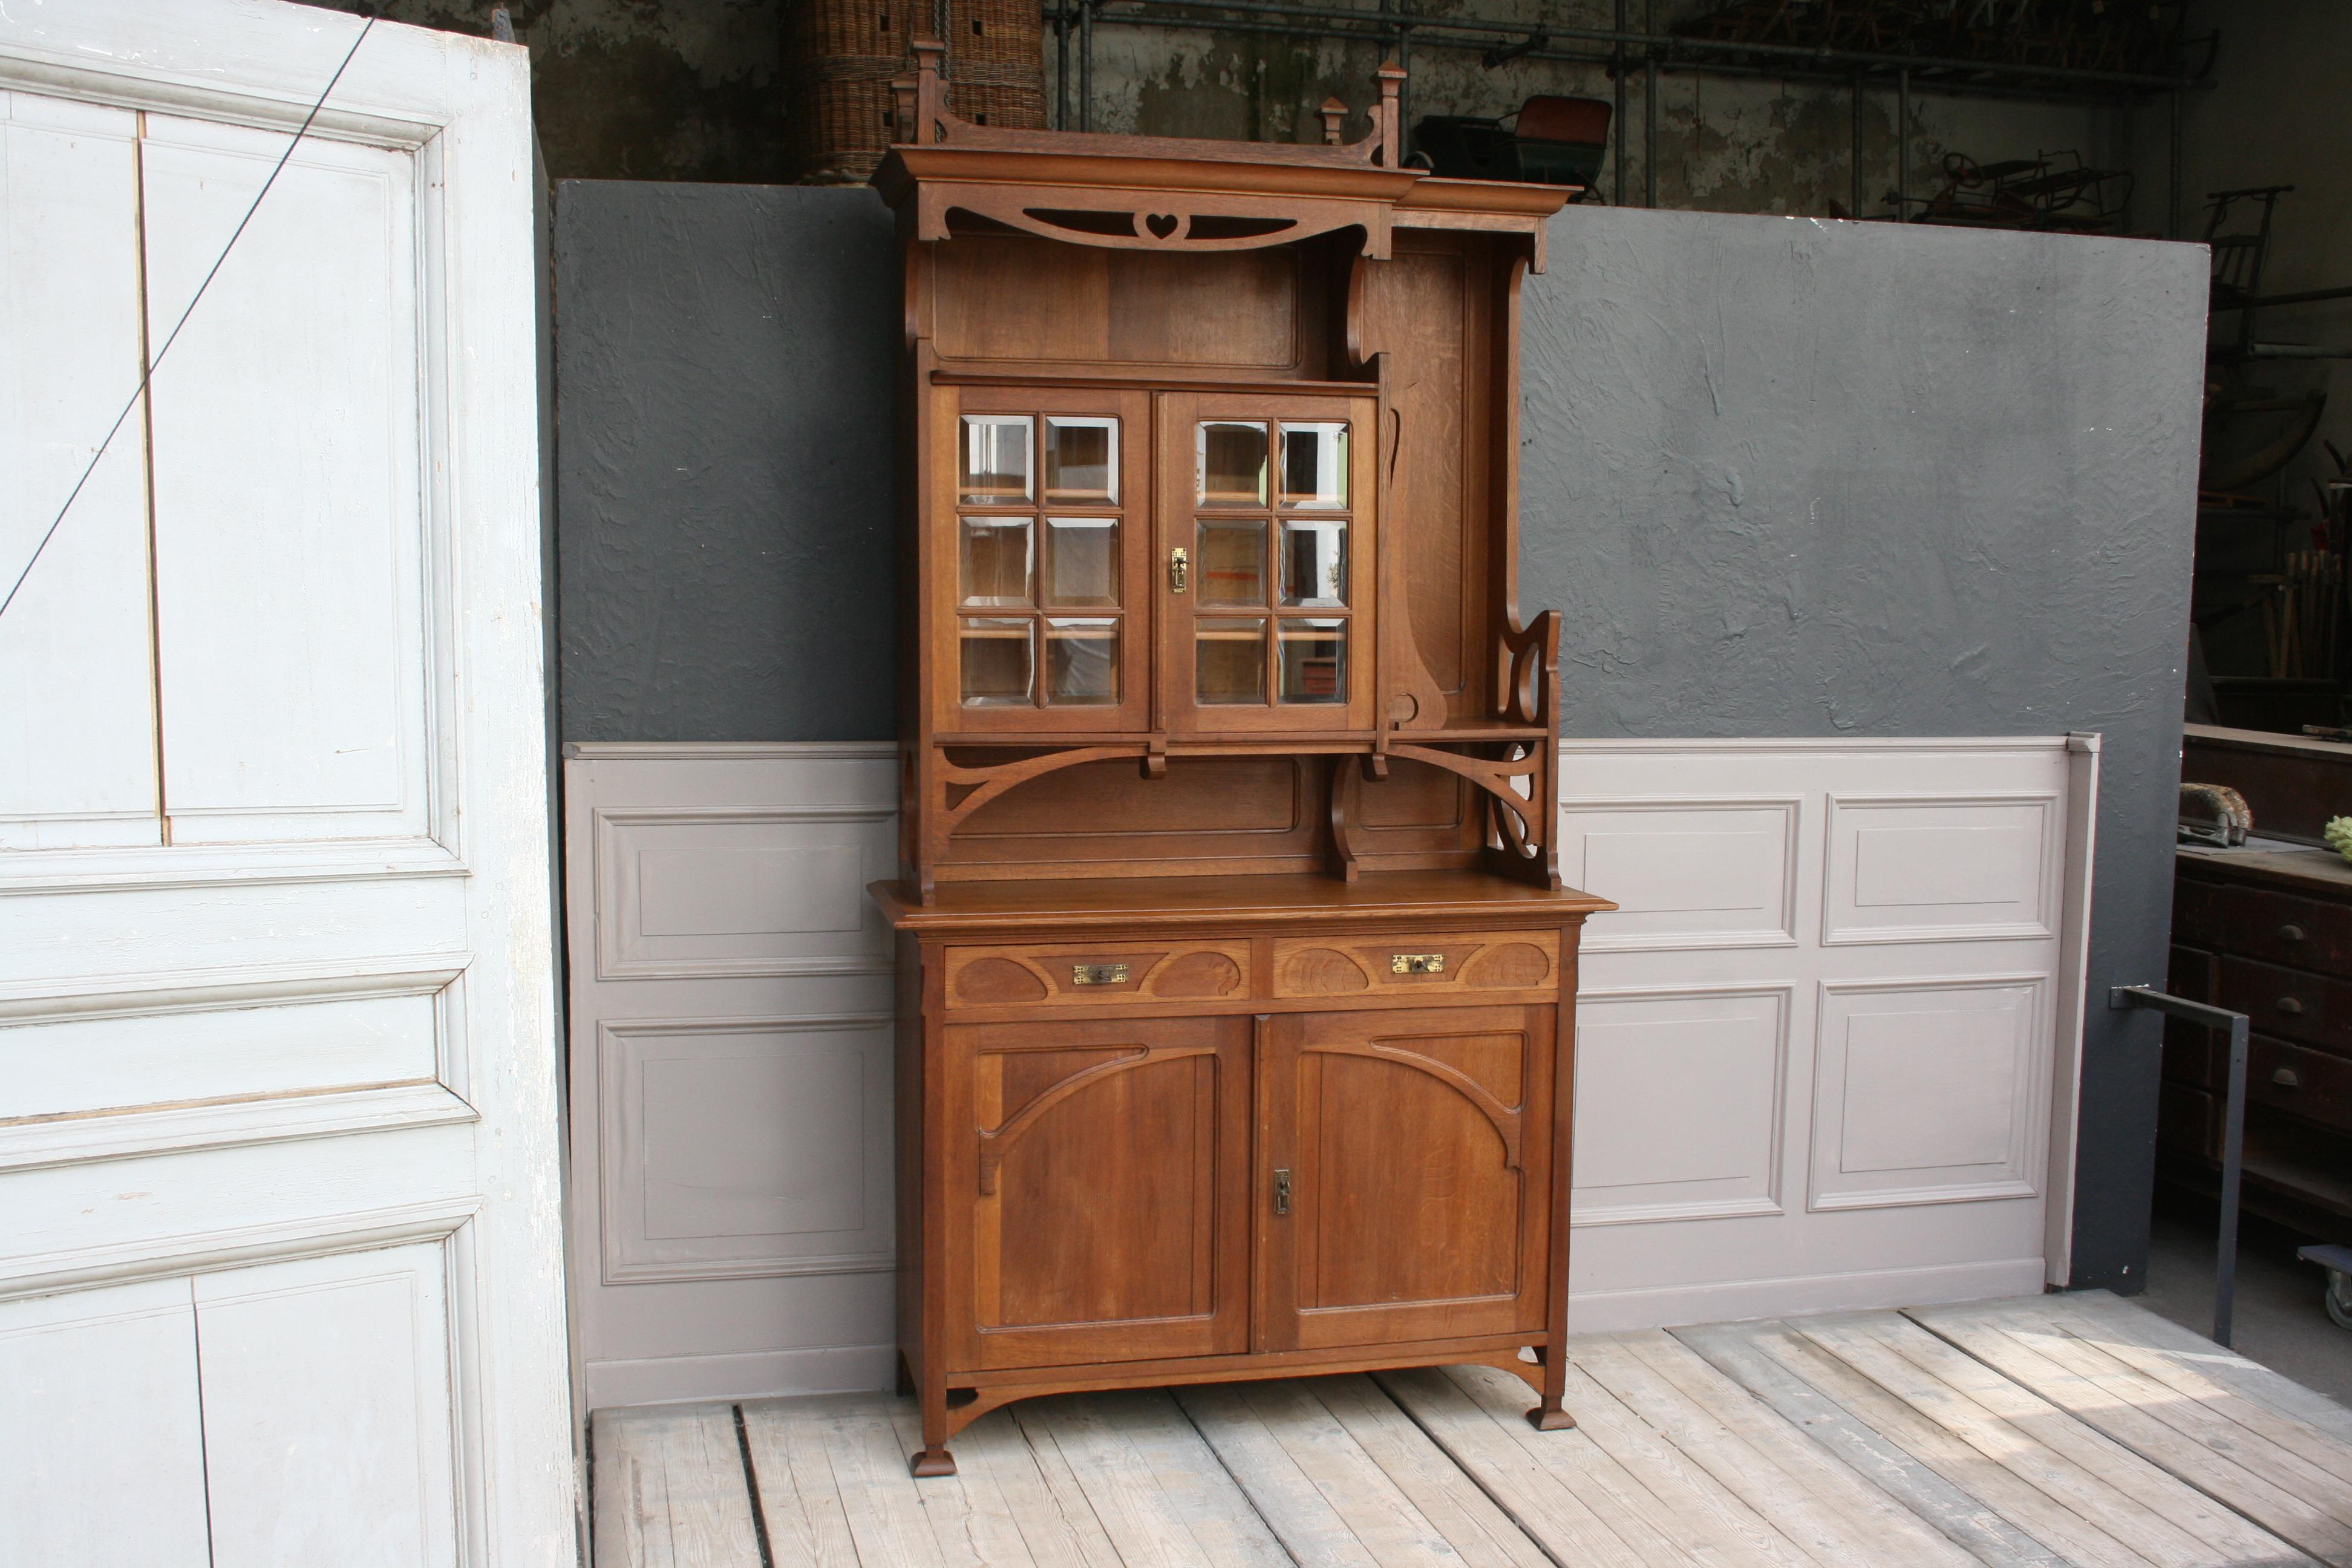 Original Art Nouveau buffet from France from circa 1910. It was made entirely of oak wood and consists of a top and a bottom. The lower part has 2 lockable ornamented drawers, as well as 2 lockable doors with a shelf behind. The top has a unique